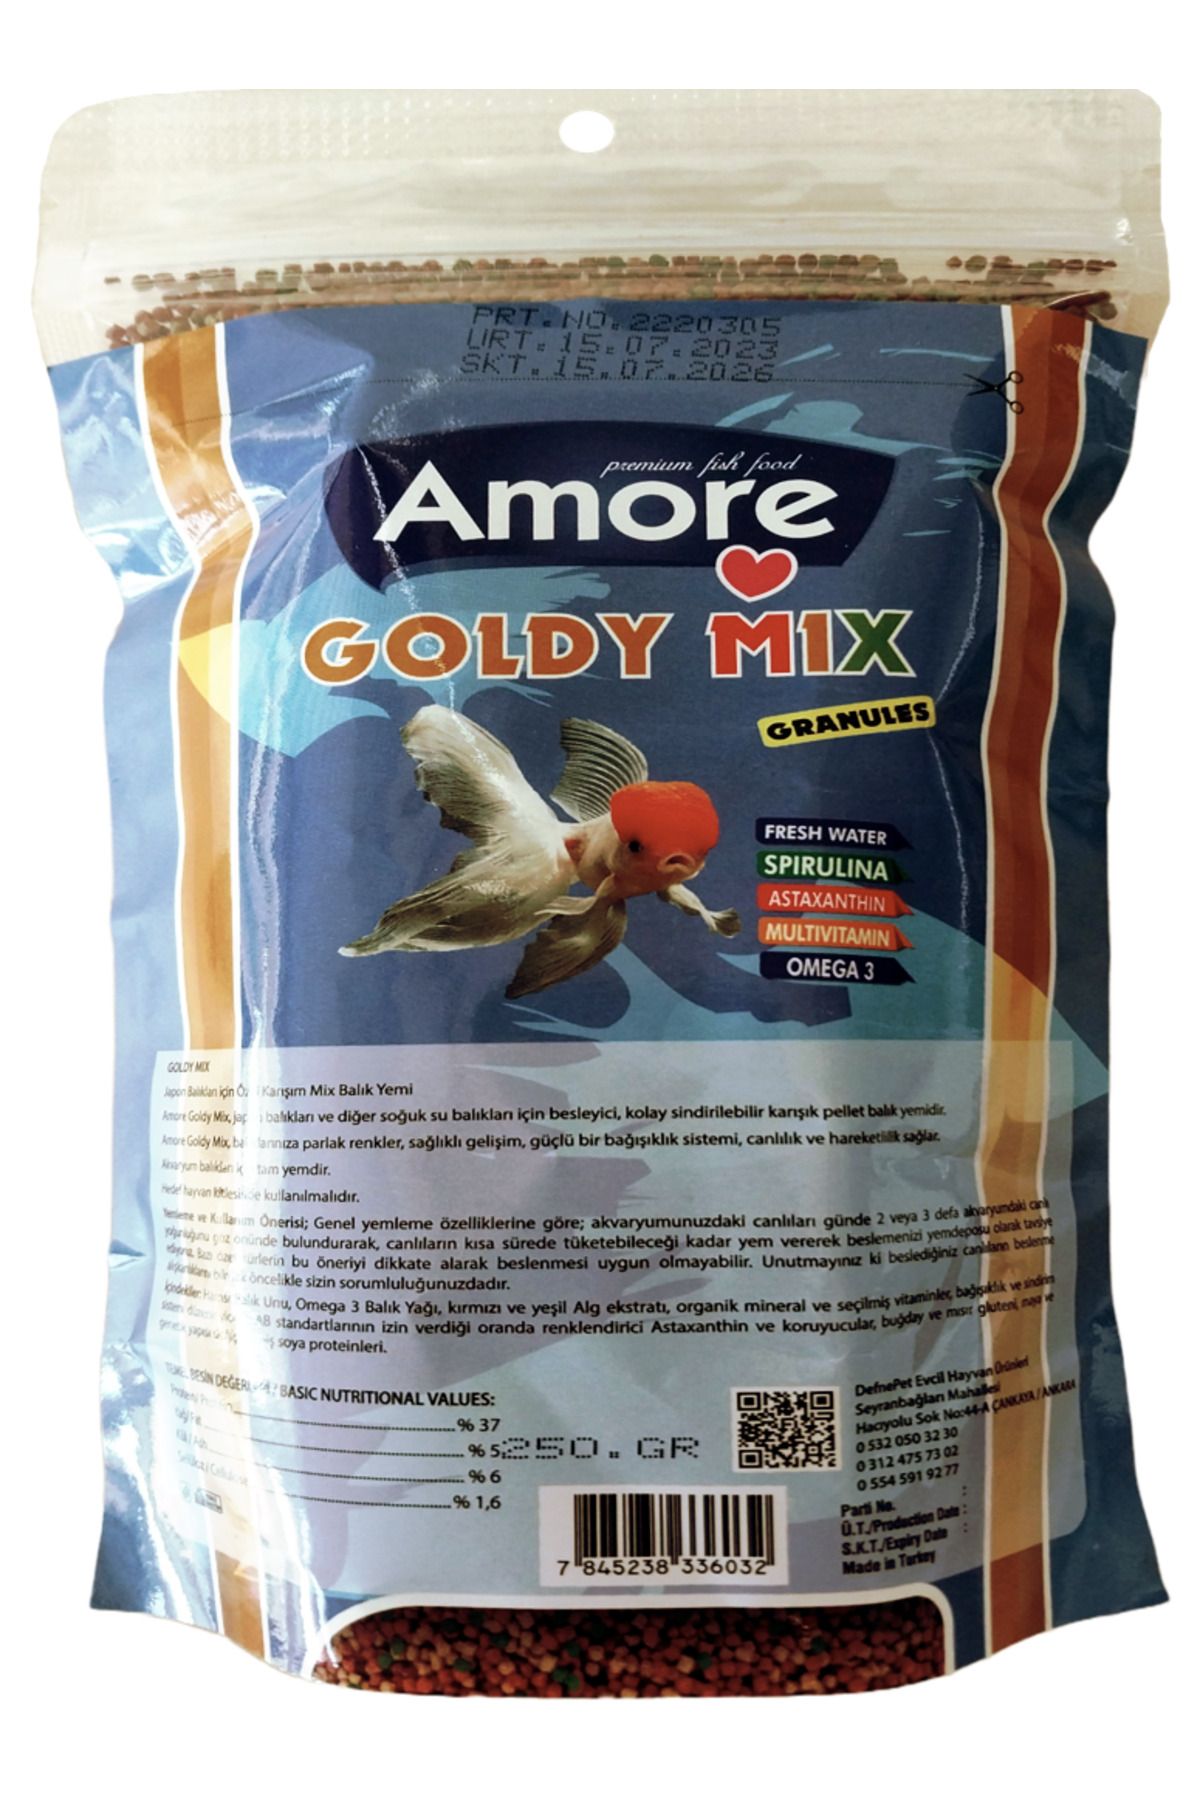 Amore Goldy Mix %37 Protein 250 gr Easy-Fill-Pack ve 1000 ml Box Granul Japon Balik Yemi